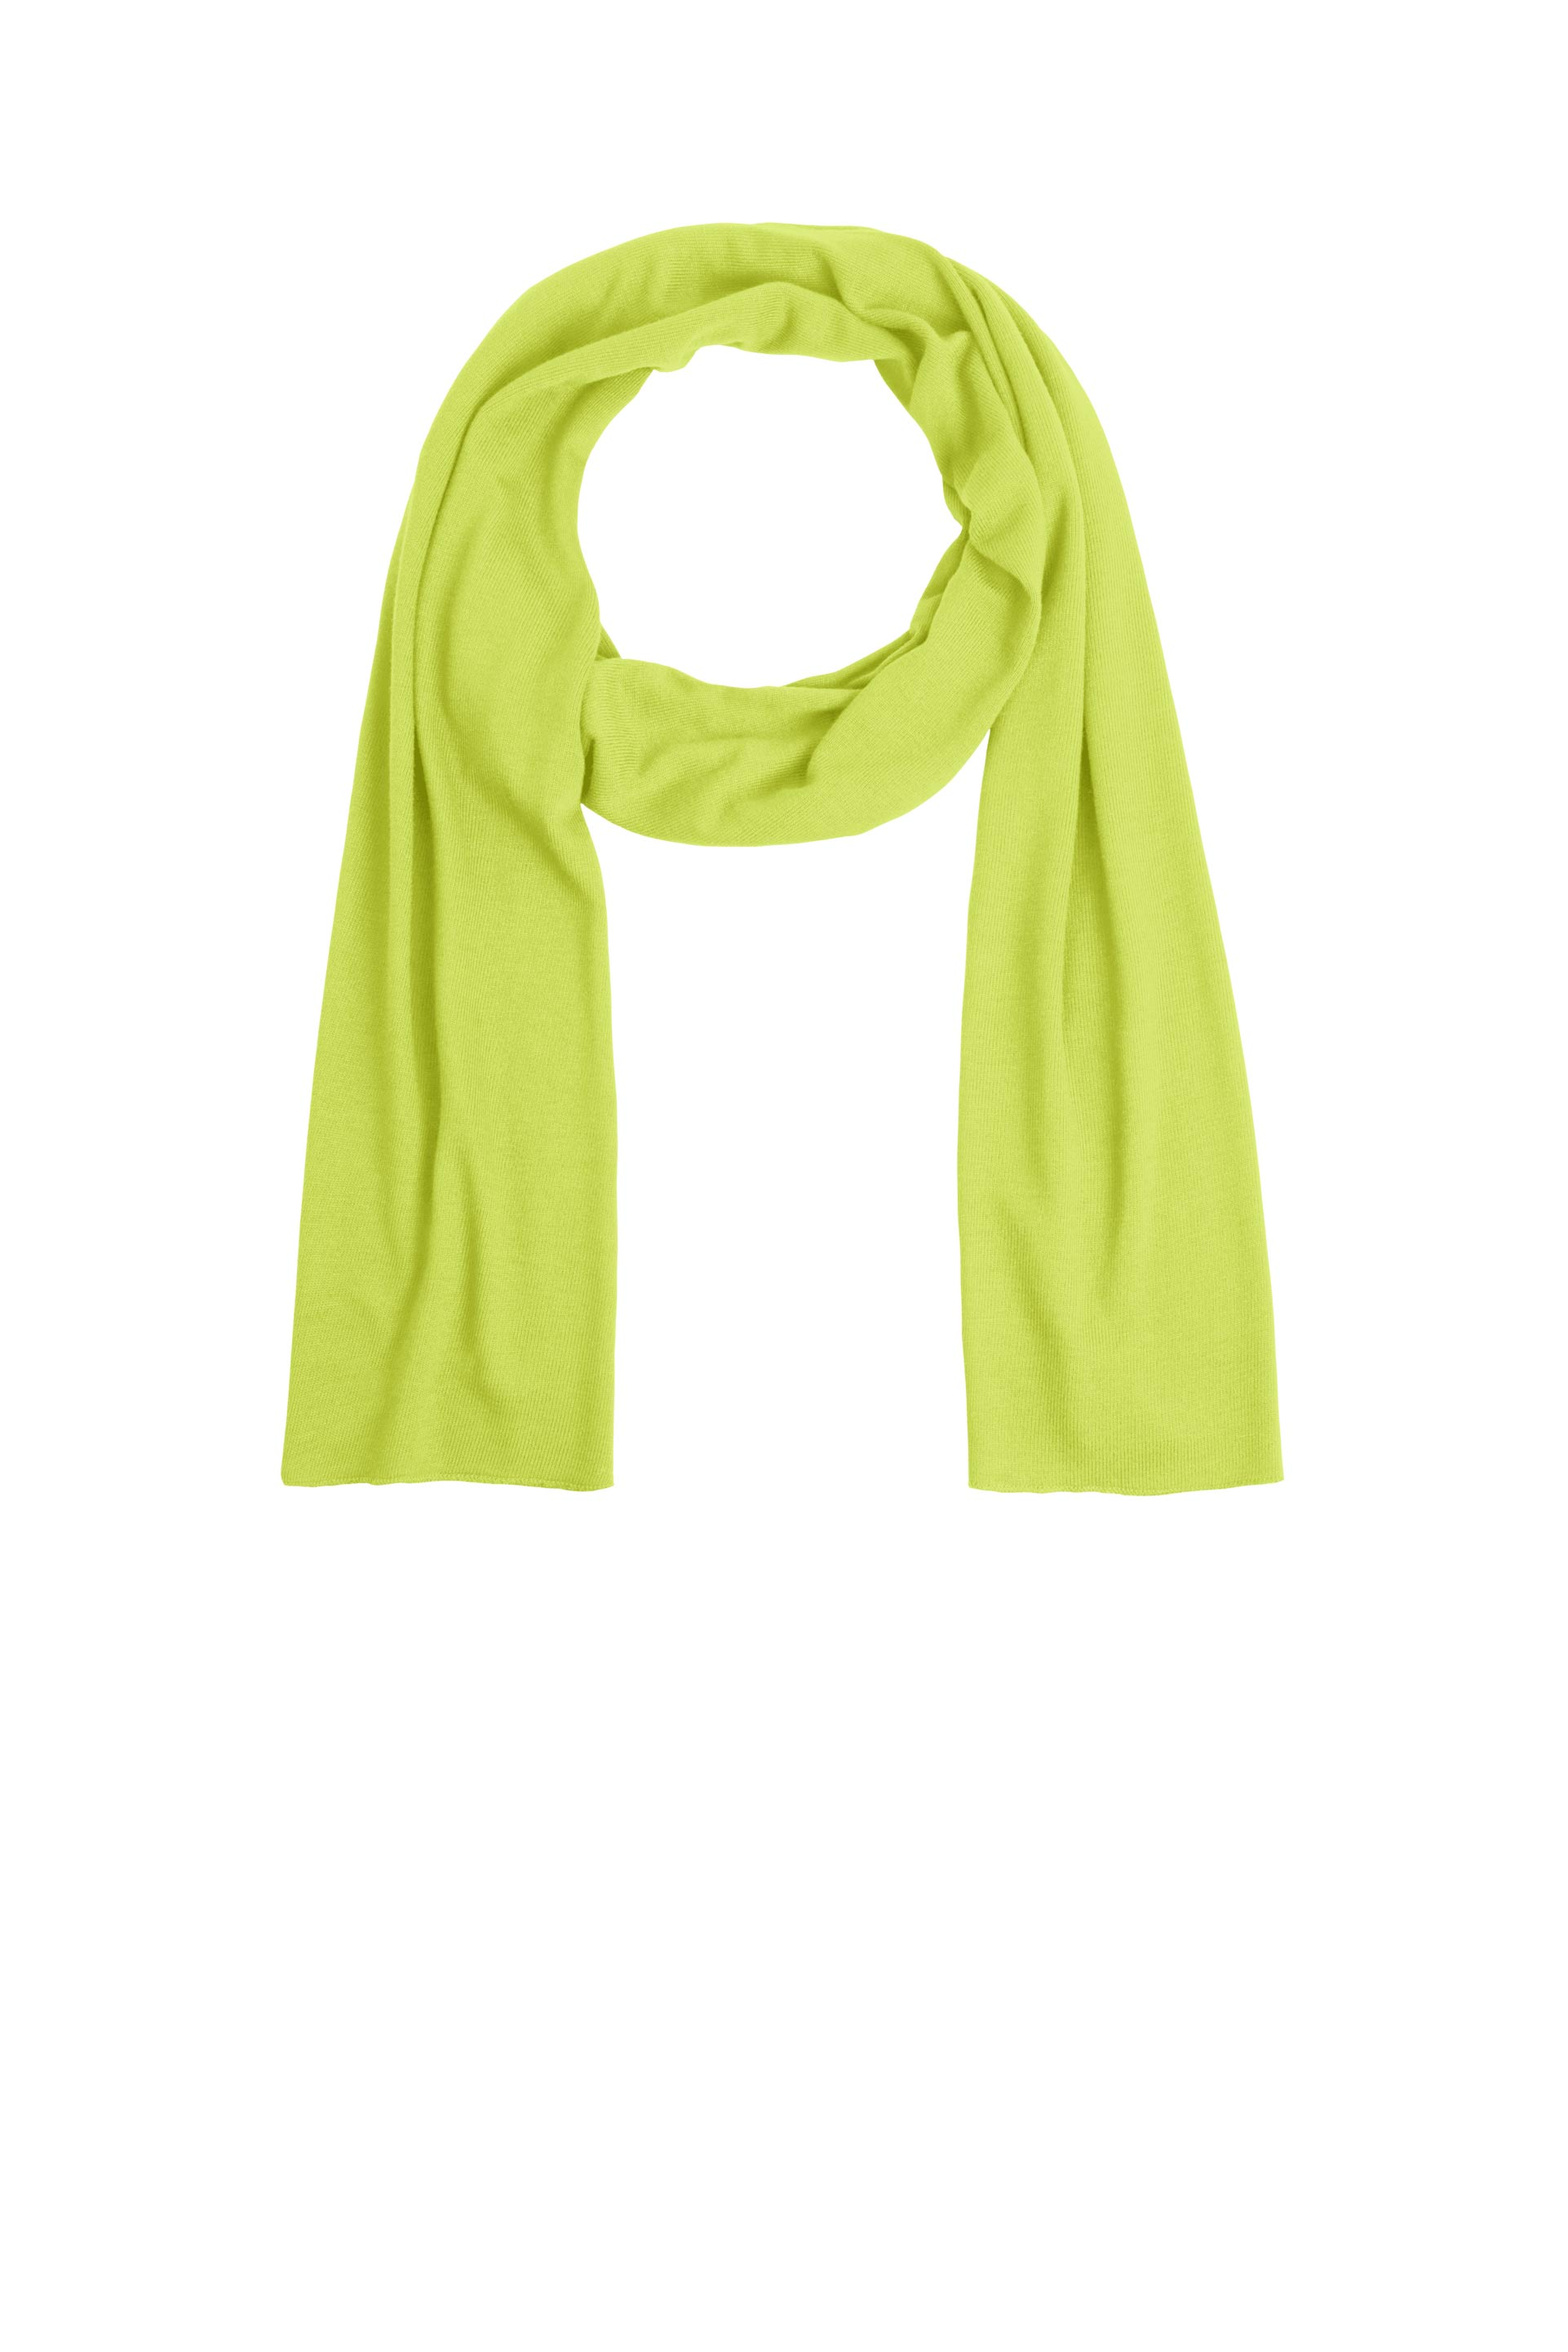 33028_willow_scarf_lime.jpg